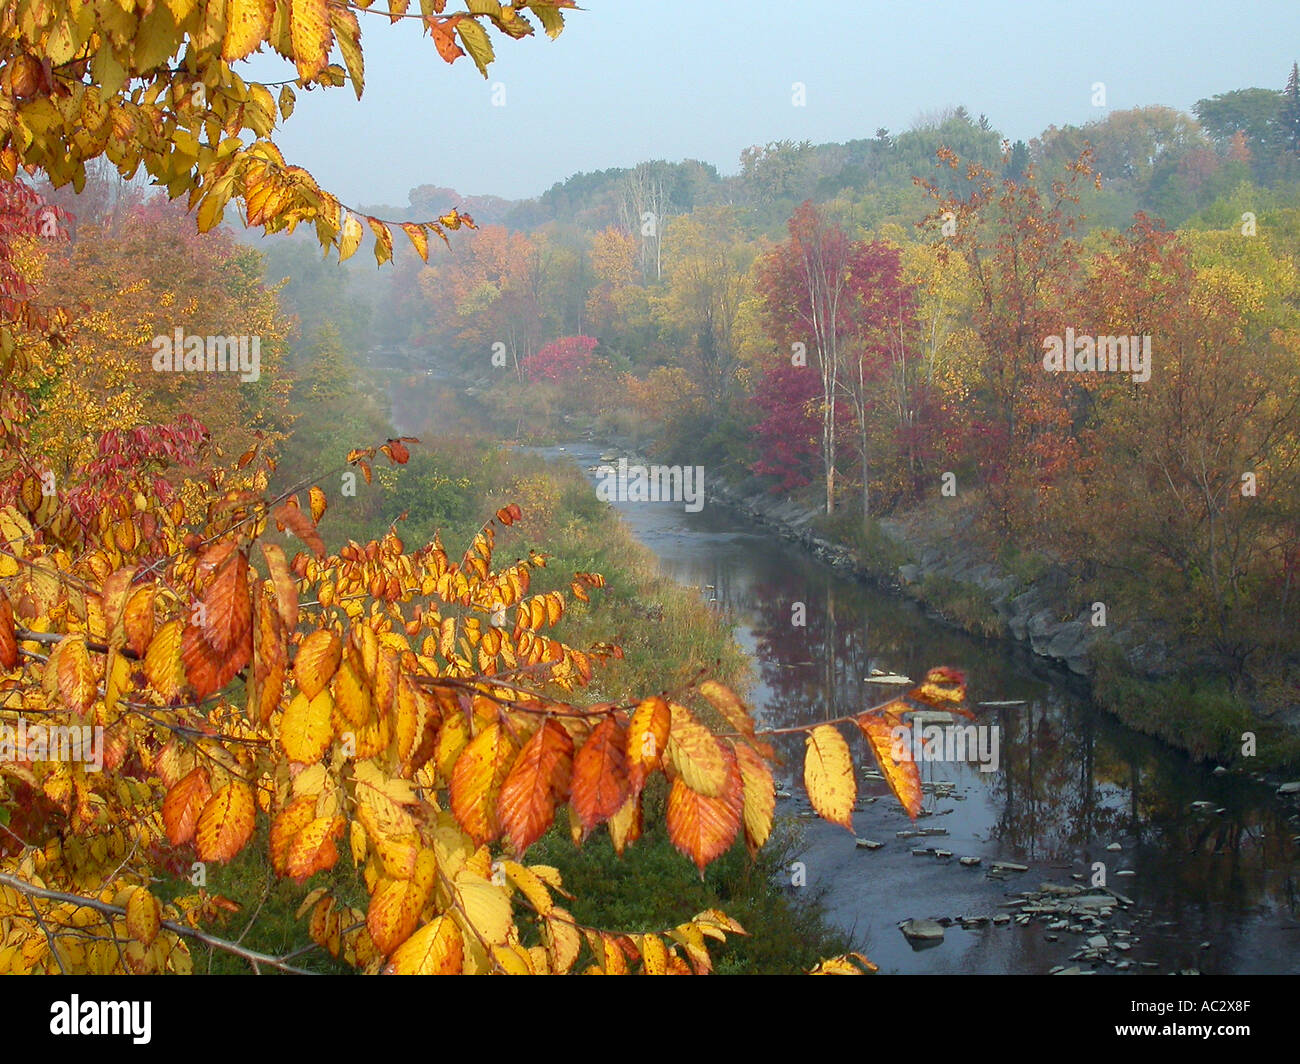 Humber river on a misty morning with trees in Fall colors Toronto Stock Photo